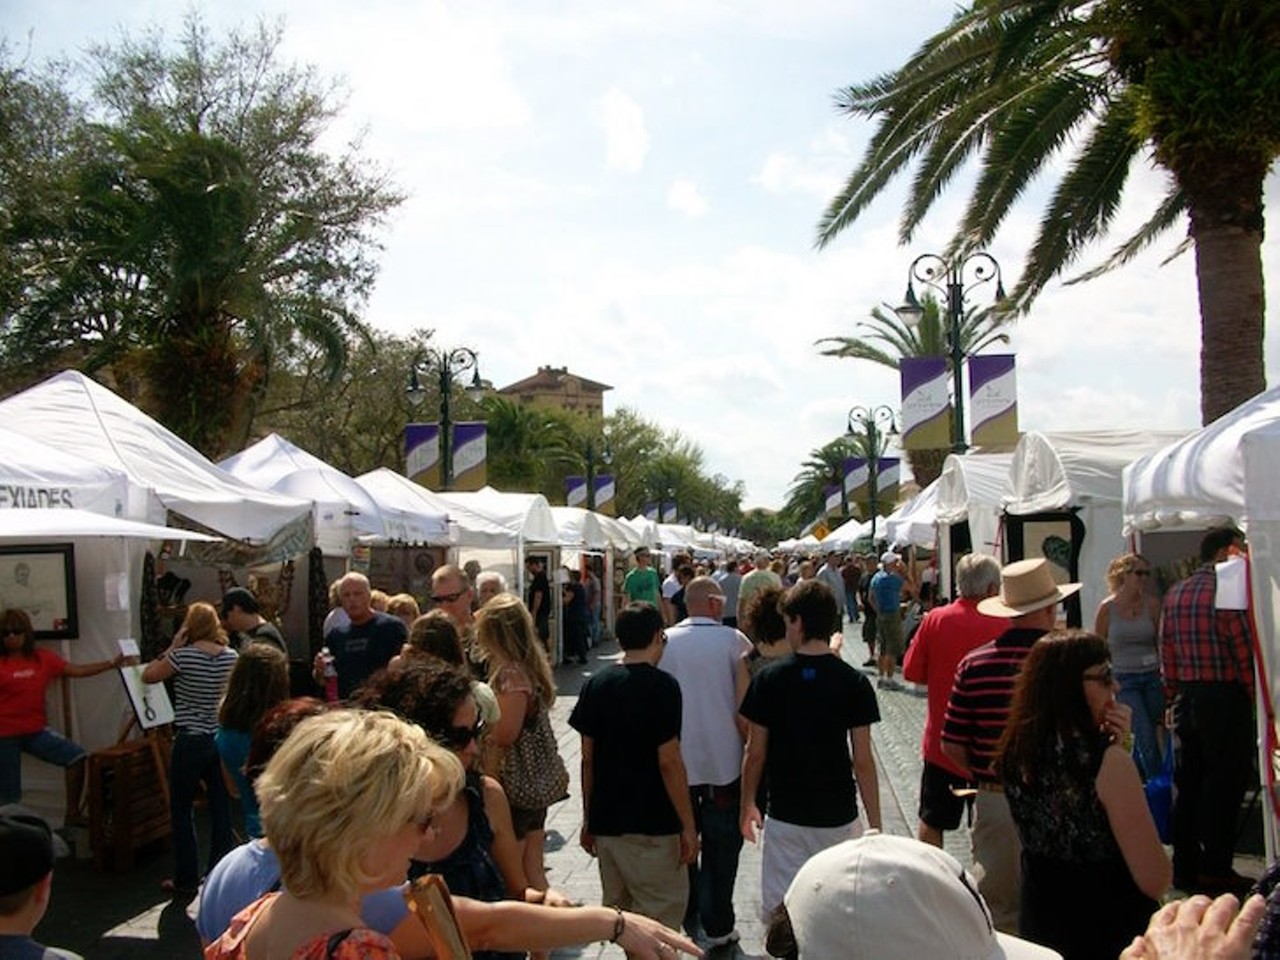 March 23Uptown Art Expo 
Exhibitions from fine artists and chalk street artists, as well as live music, food and other vendors. 10 am-7:30 pm; Cranes Roost Park, 274 Cranes Roost Blvd., Altamonte Springs; free; 407-571-8863; uptownartexpo.com
Photo via Facebook/Uptown Art Expo